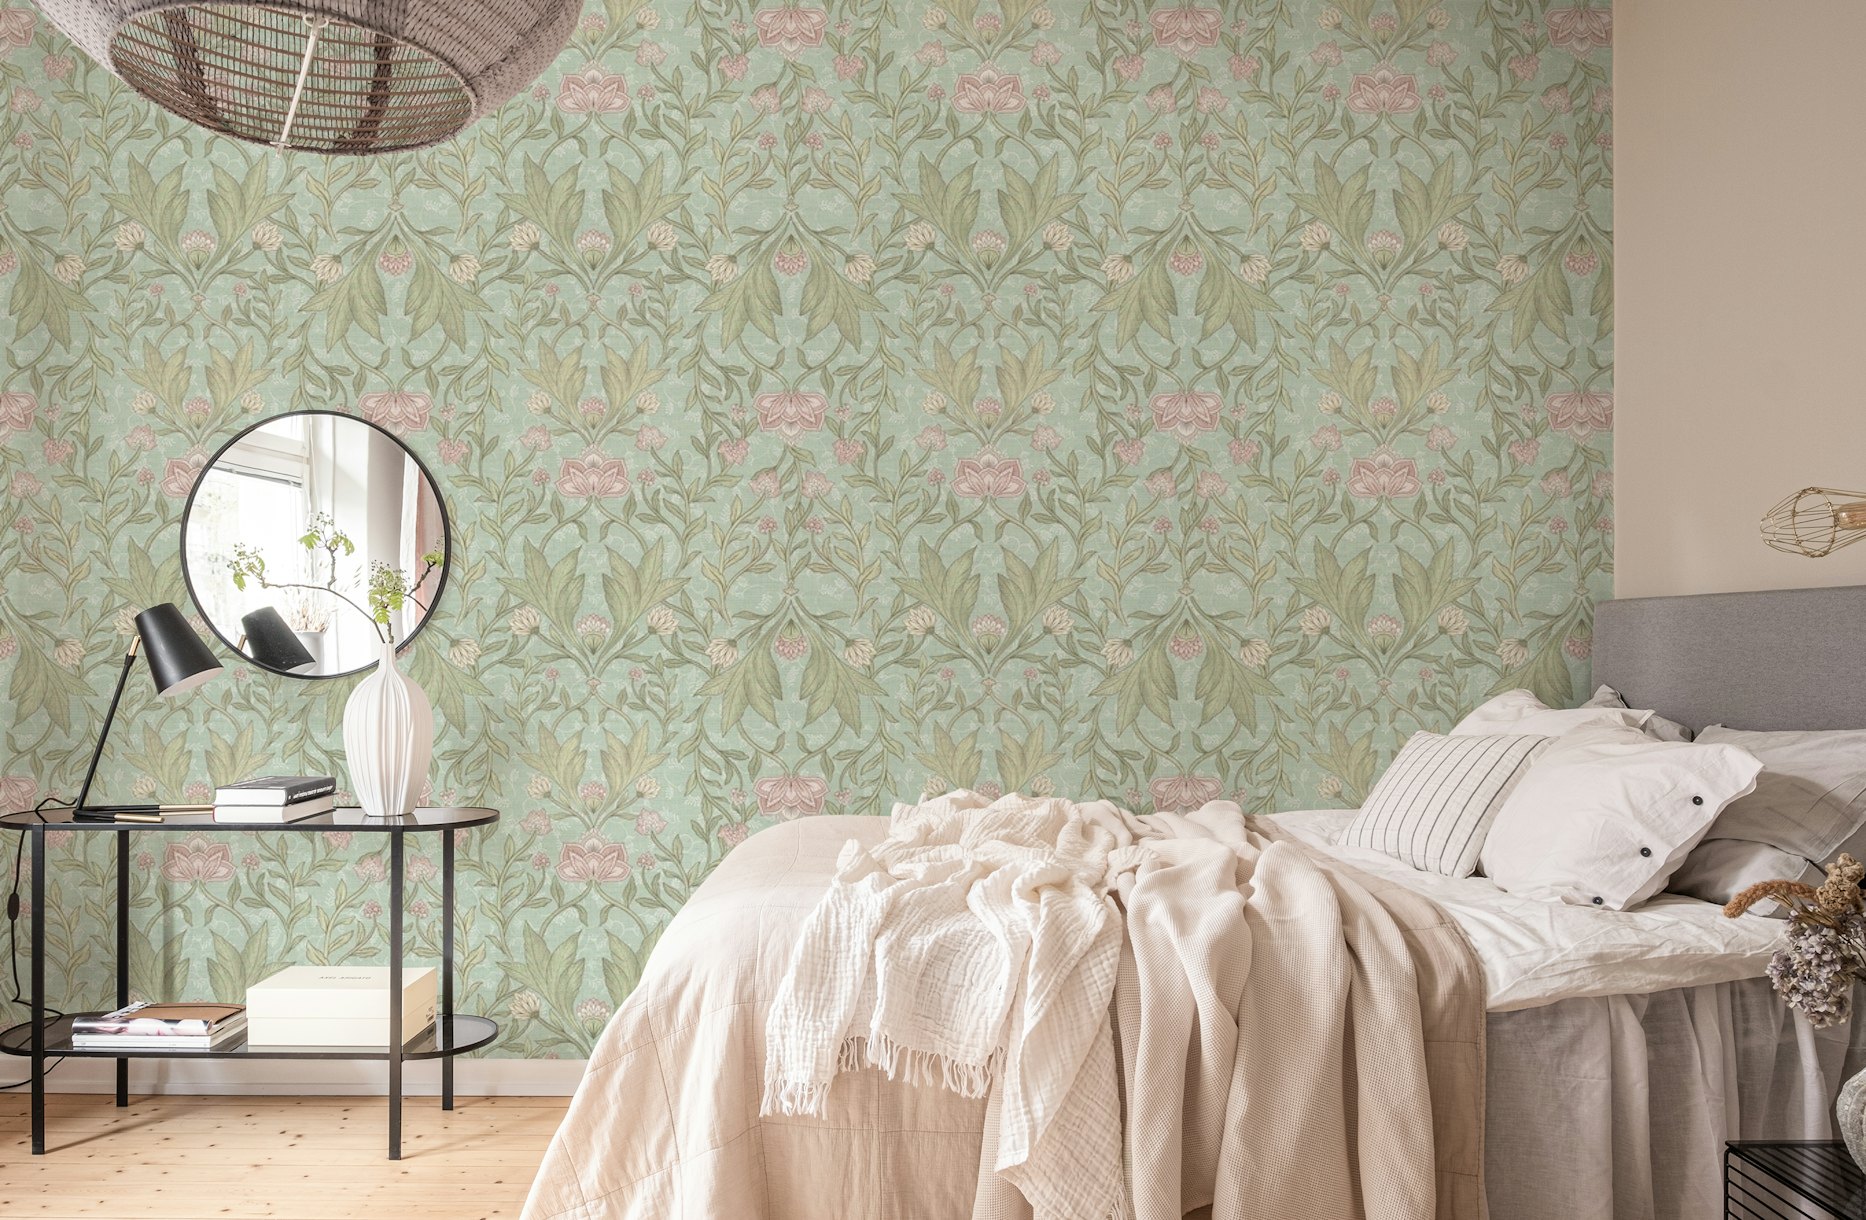 Florals and leaves damask wallpaper